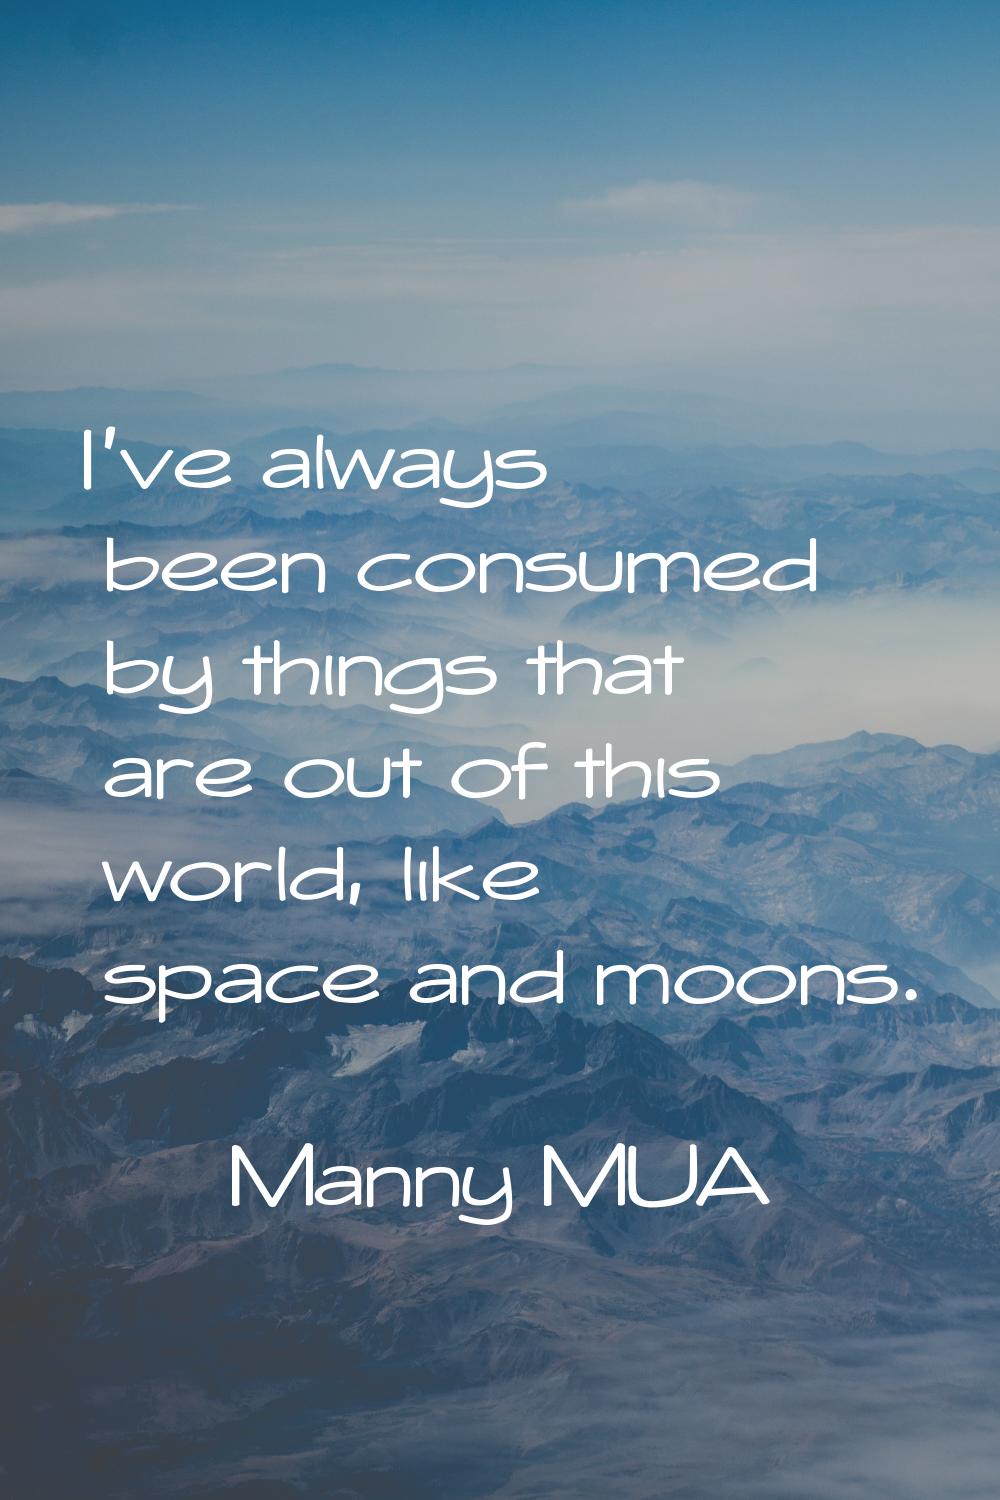 I've always been consumed by things that are out of this world, like space and moons.